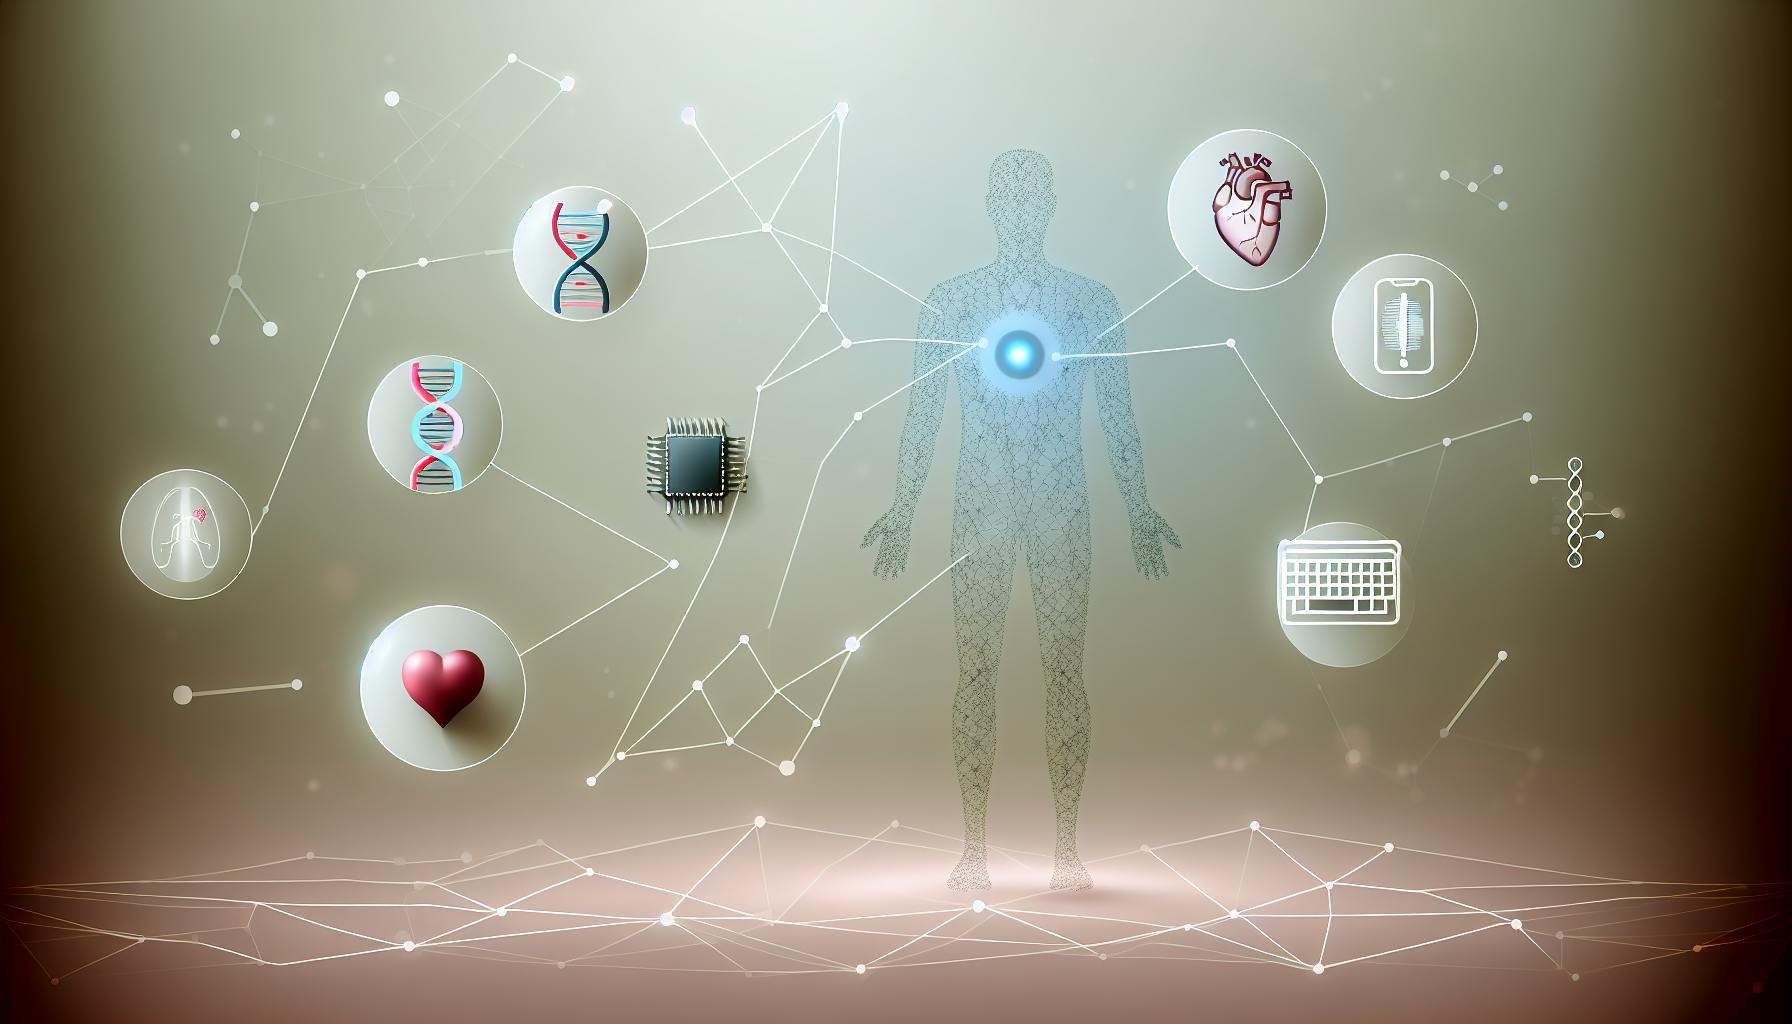 Top Machine Learning Trends to Watch: The Future of Healthcare